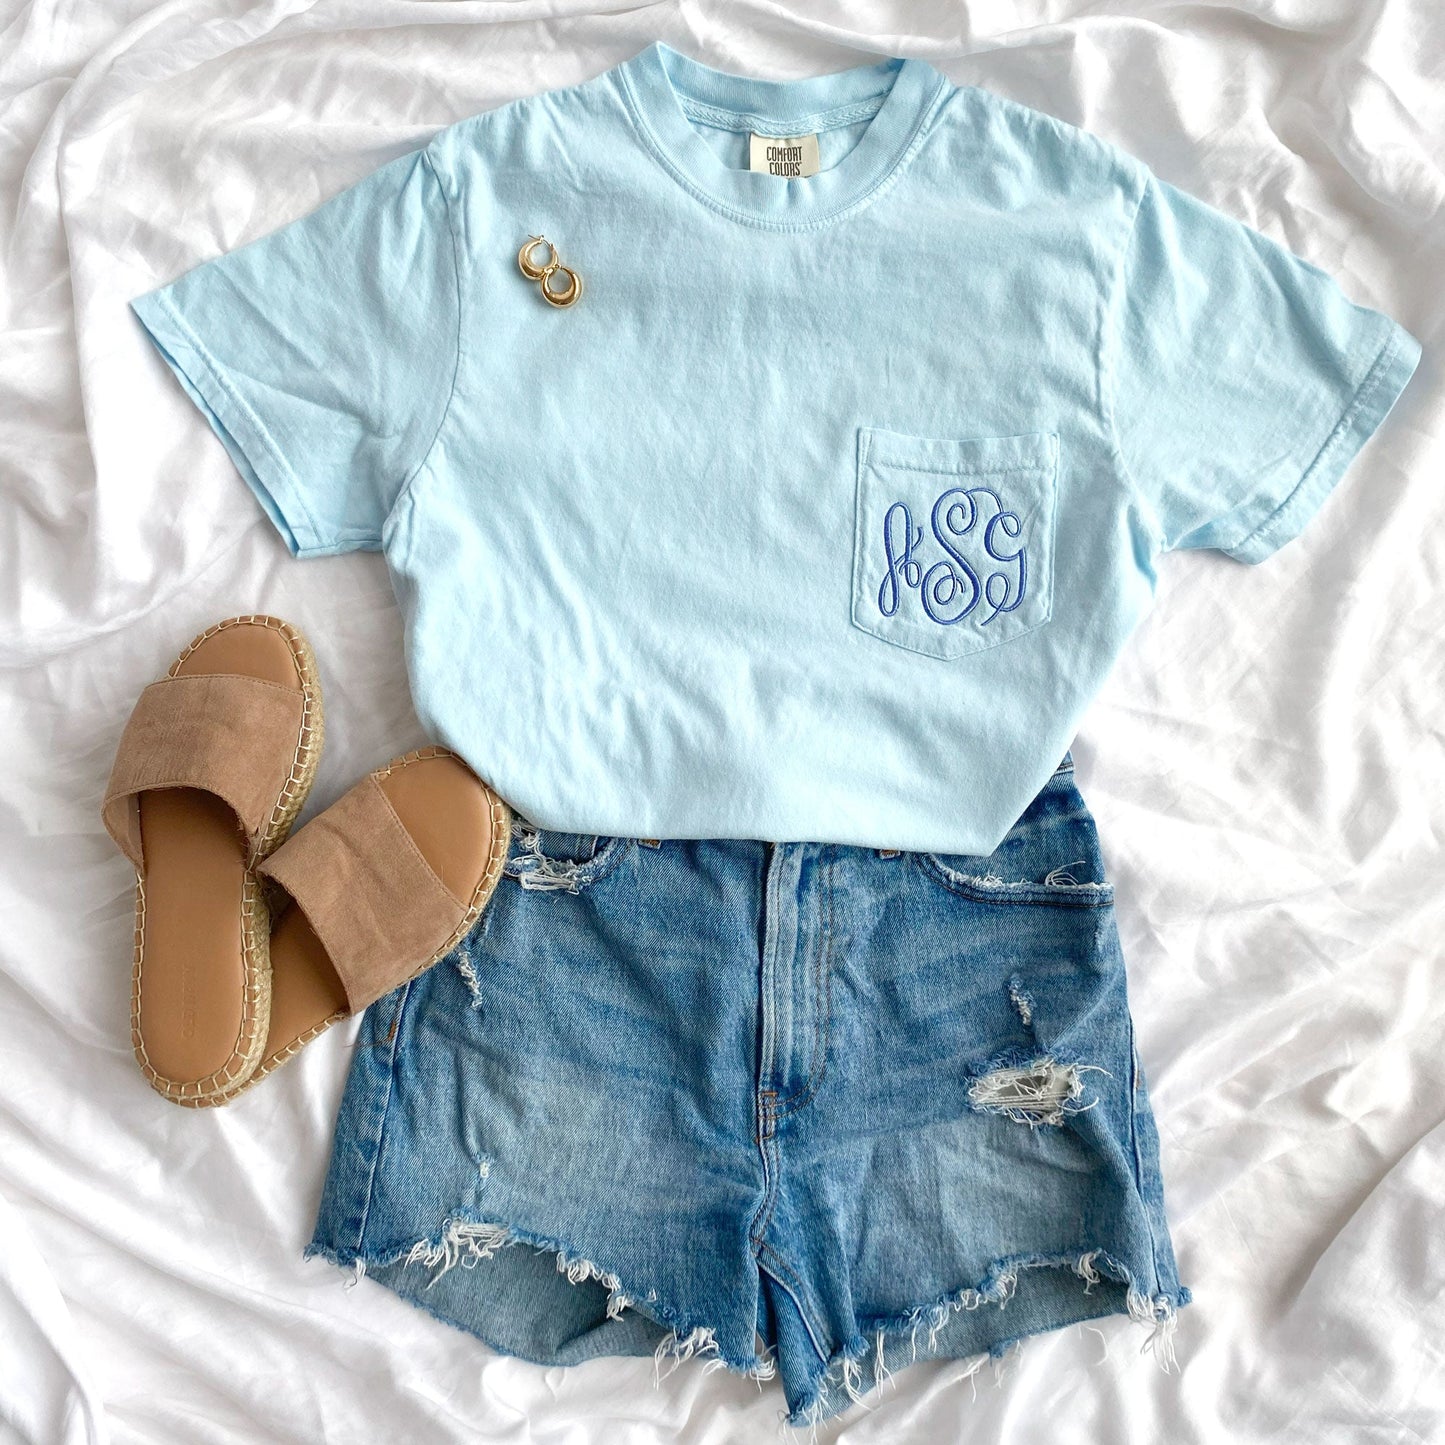 styled outfit of chambray confort colors tee with monogram embroidered on the pocket with jeans and sneakers 